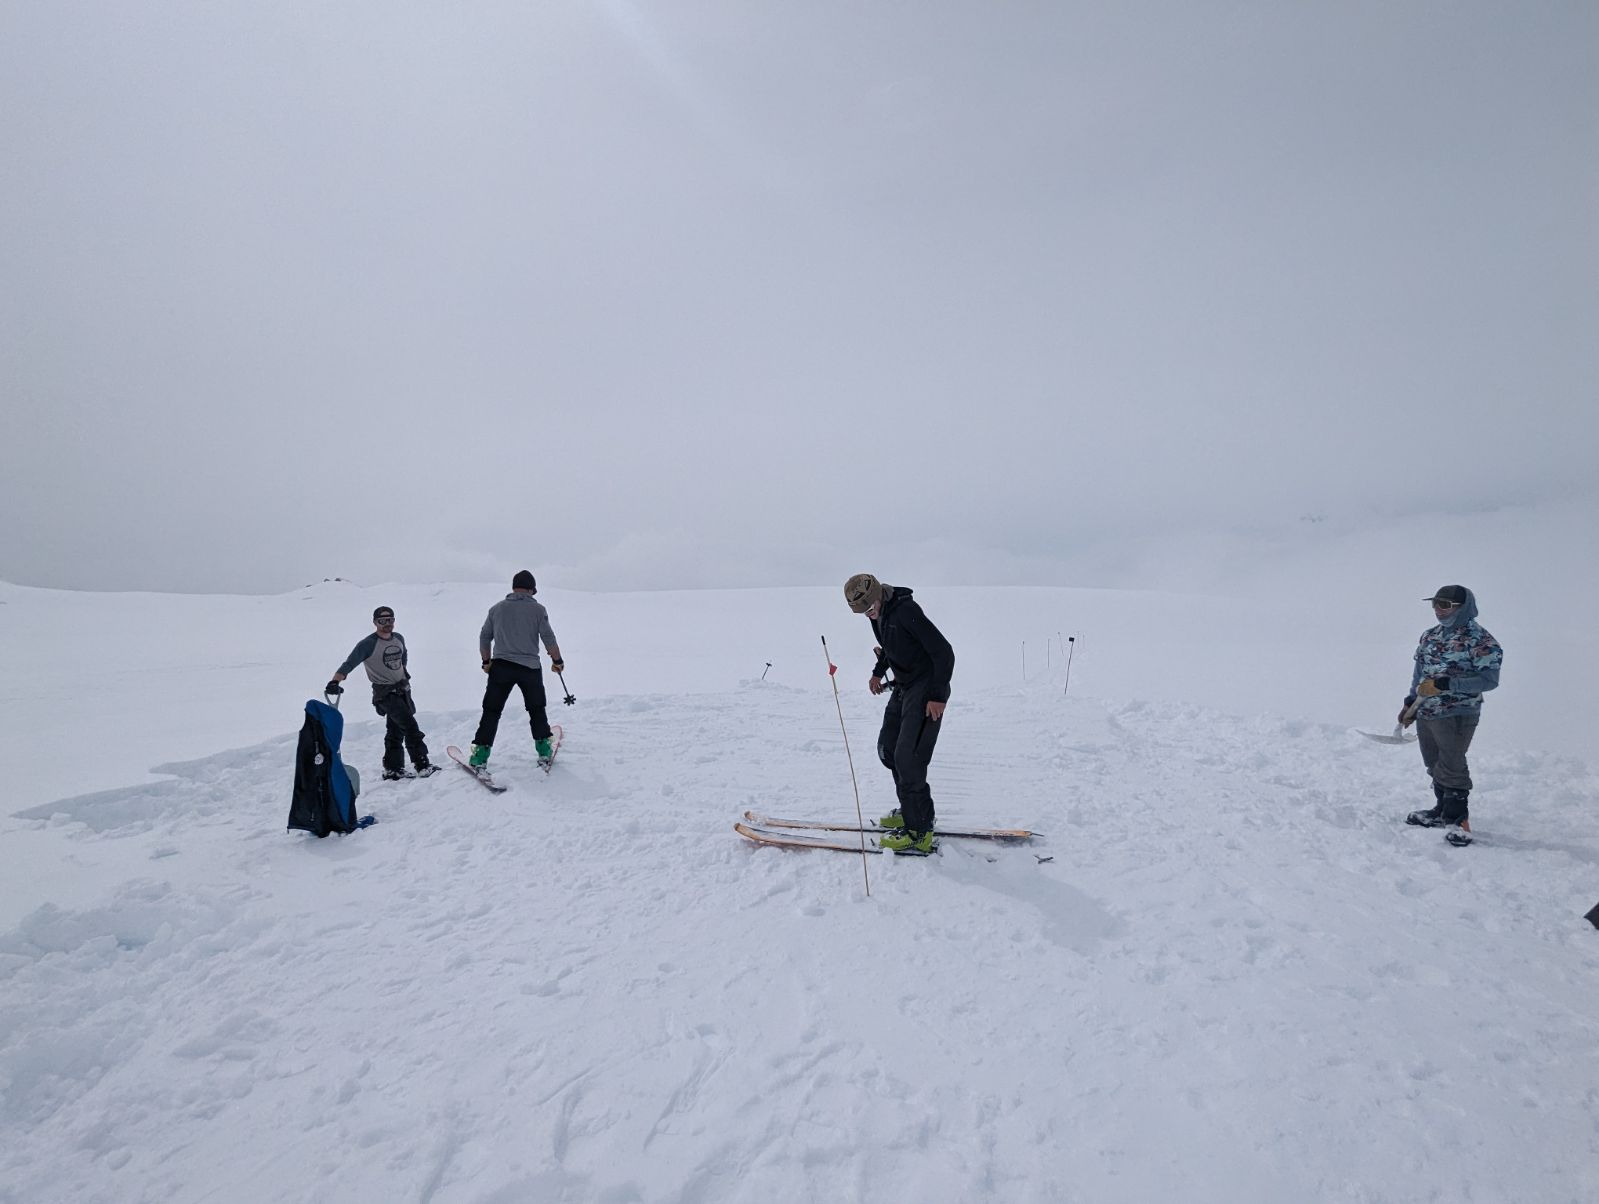 Four patrol members, two on wide skis and two with shovels, prepare a helicopter landing pad on a glacier